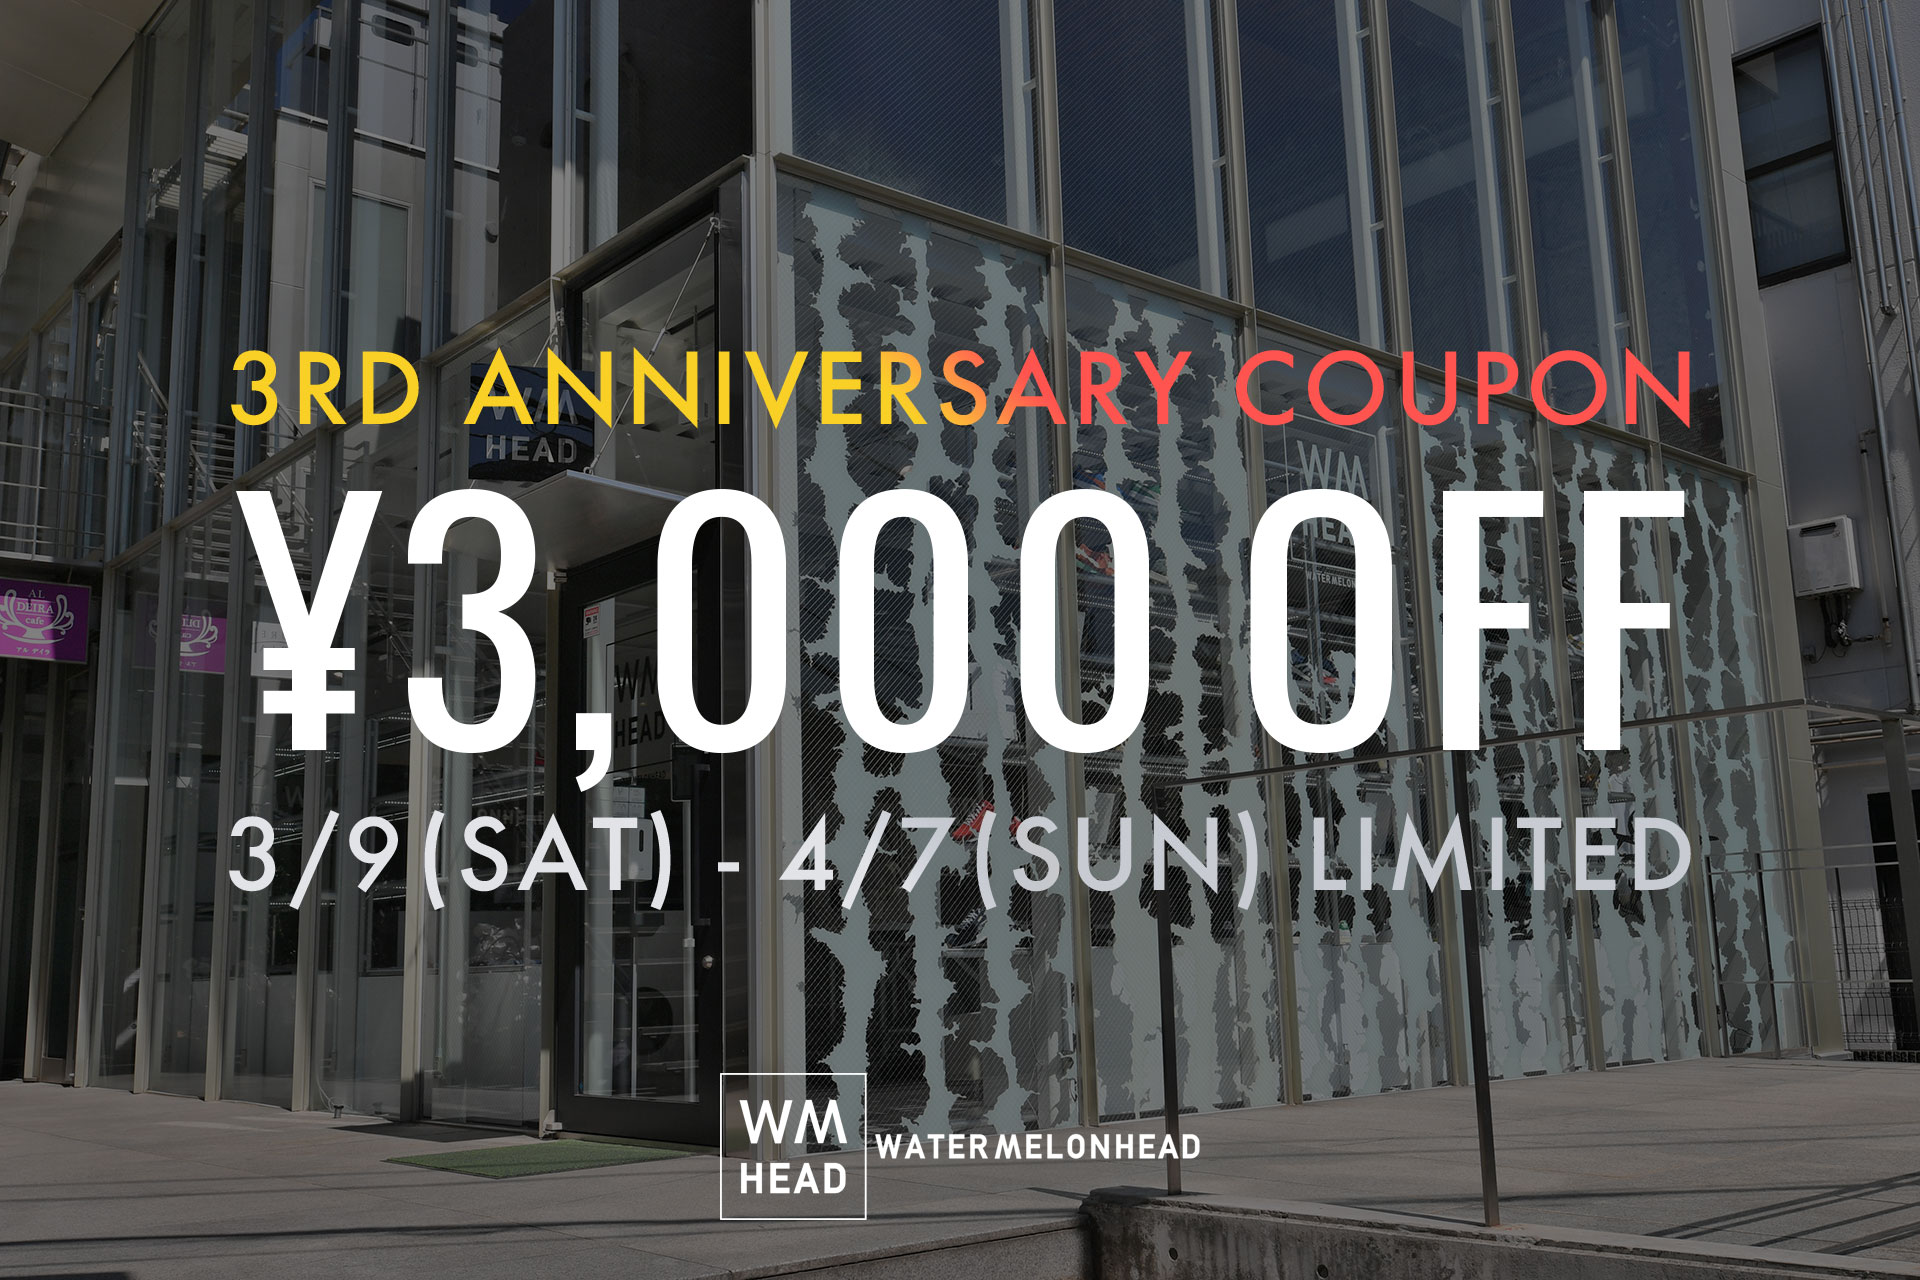 3RD ANNIVERSARY COUPON